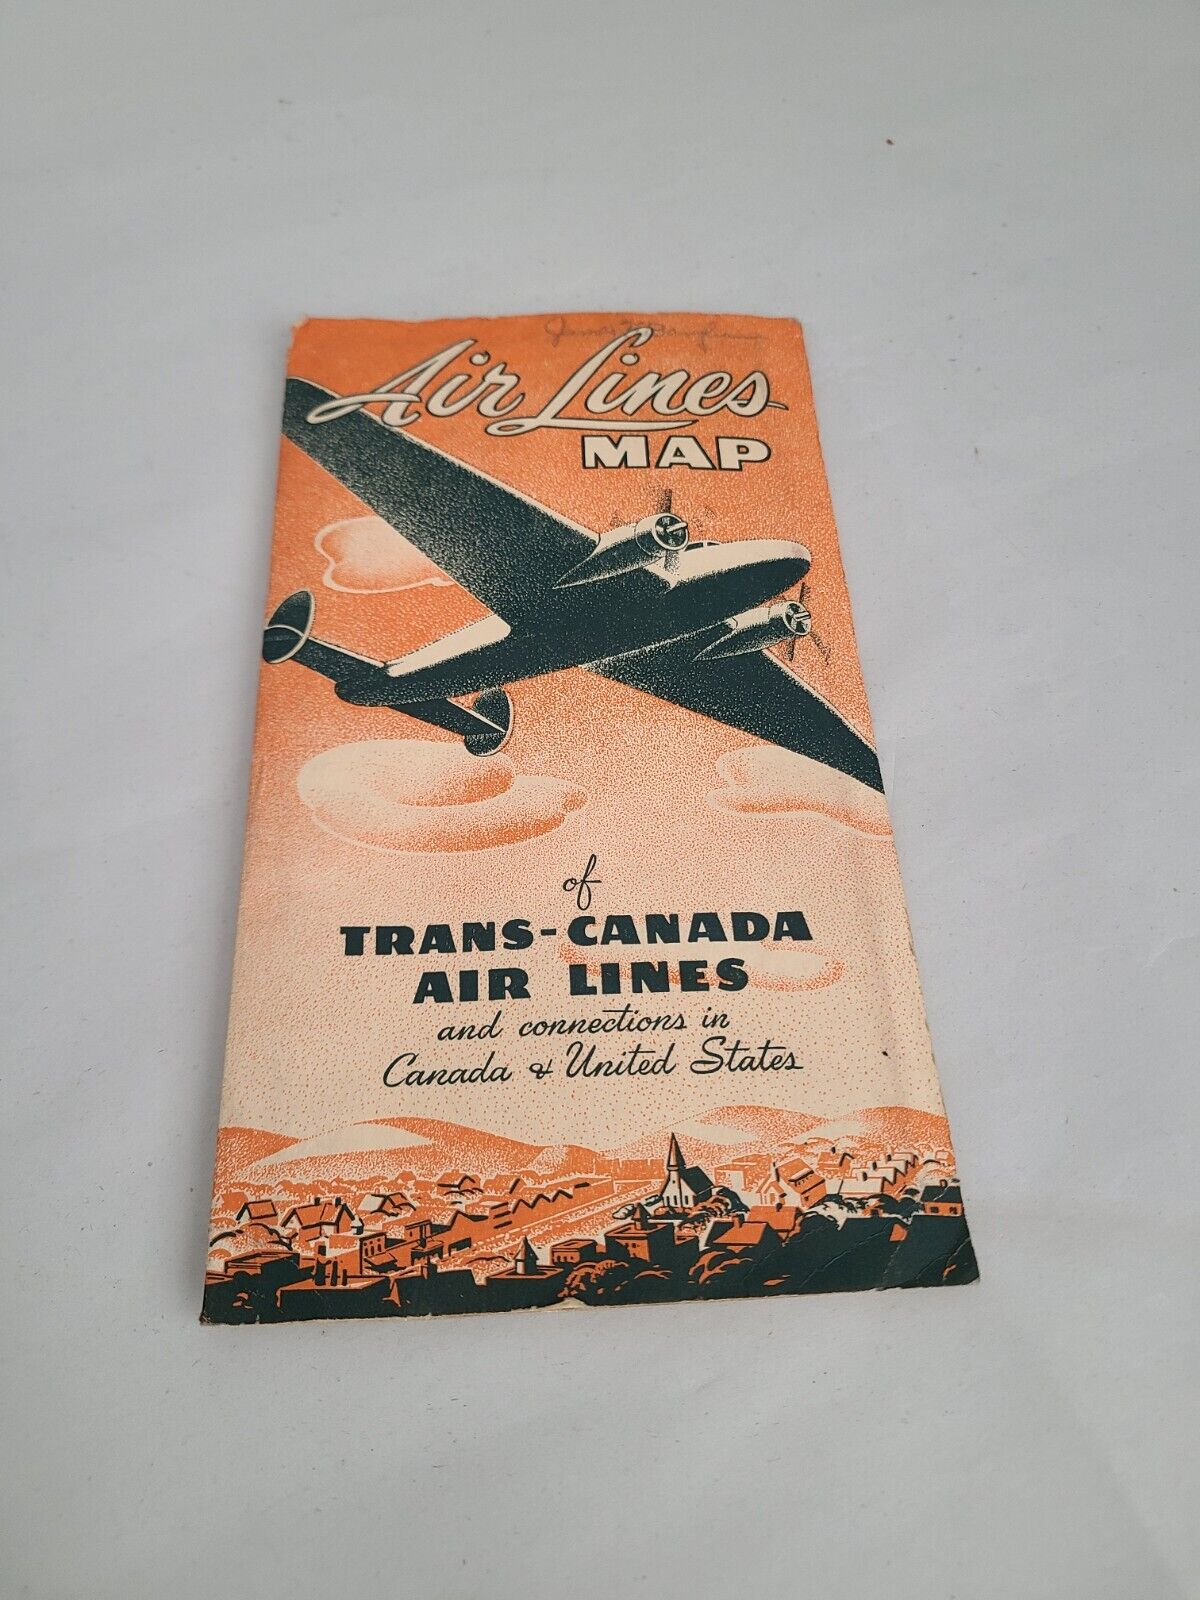 Vintage 1941 Air Lines Map Of Trans-Canada Air Lines & Connections in CA & US